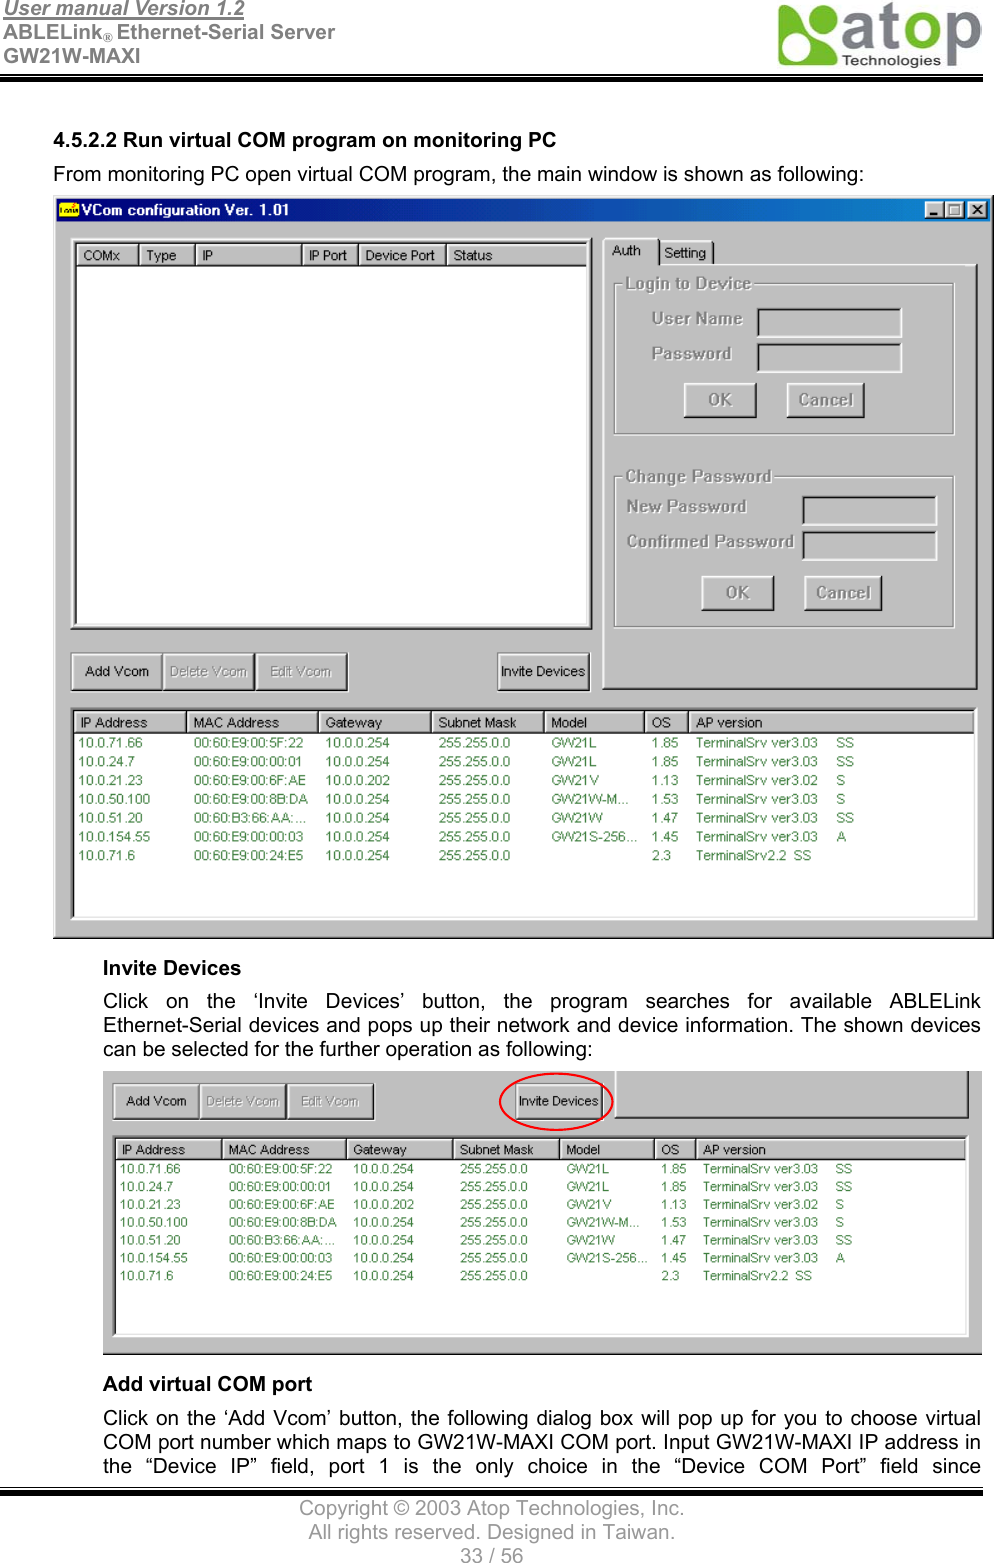 User manual Version 1.2 ABLELink® Ethernet-Serial Server   GW21W-MAXI                                      Copyright © 2003 Atop Technologies, Inc. All rights reserved. Designed in Taiwan. 33 / 56   4.5.2.2 Run virtual COM program on monitoring PC From monitoring PC open virtual COM program, the main window is shown as following:  Invite Devices Click on the ‘Invite Devices’ button, the program searches for available ABLELink Ethernet-Serial devices and pops up their network and device information. The shown devices can be selected for the further operation as following:    Add virtual COM port Click on the ‘Add Vcom’ button, the following dialog box will pop up for you to choose virtual COM port number which maps to GW21W-MAXI COM port. Input GW21W-MAXI IP address in the “Device IP” field, port 1 is the only choice in the “Device COM Port” field since 